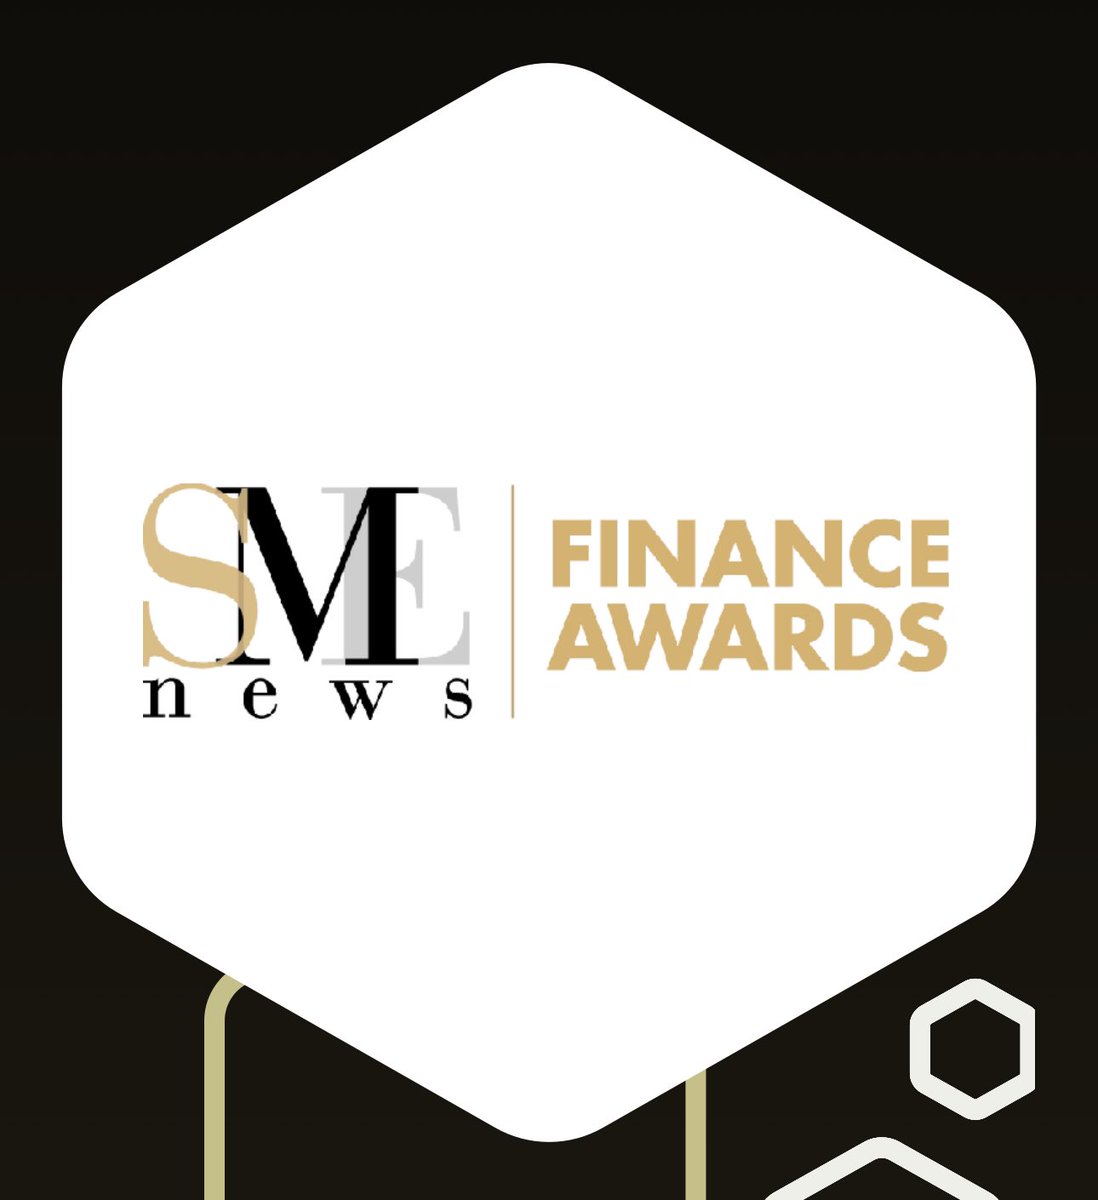 Stone Mountain Capital #Ventures LLP delighted to be awarded “Best #Fintech & #Blockchain #PE Manager” in SME News UK Finance Awards 2023🏆@stonemountainuk @stonemountaincp @stonemountainch @stonemountainae @stonemountaincv @SME__News #venturecapital #vc stonemountain-capital.net/news/stone-mou…